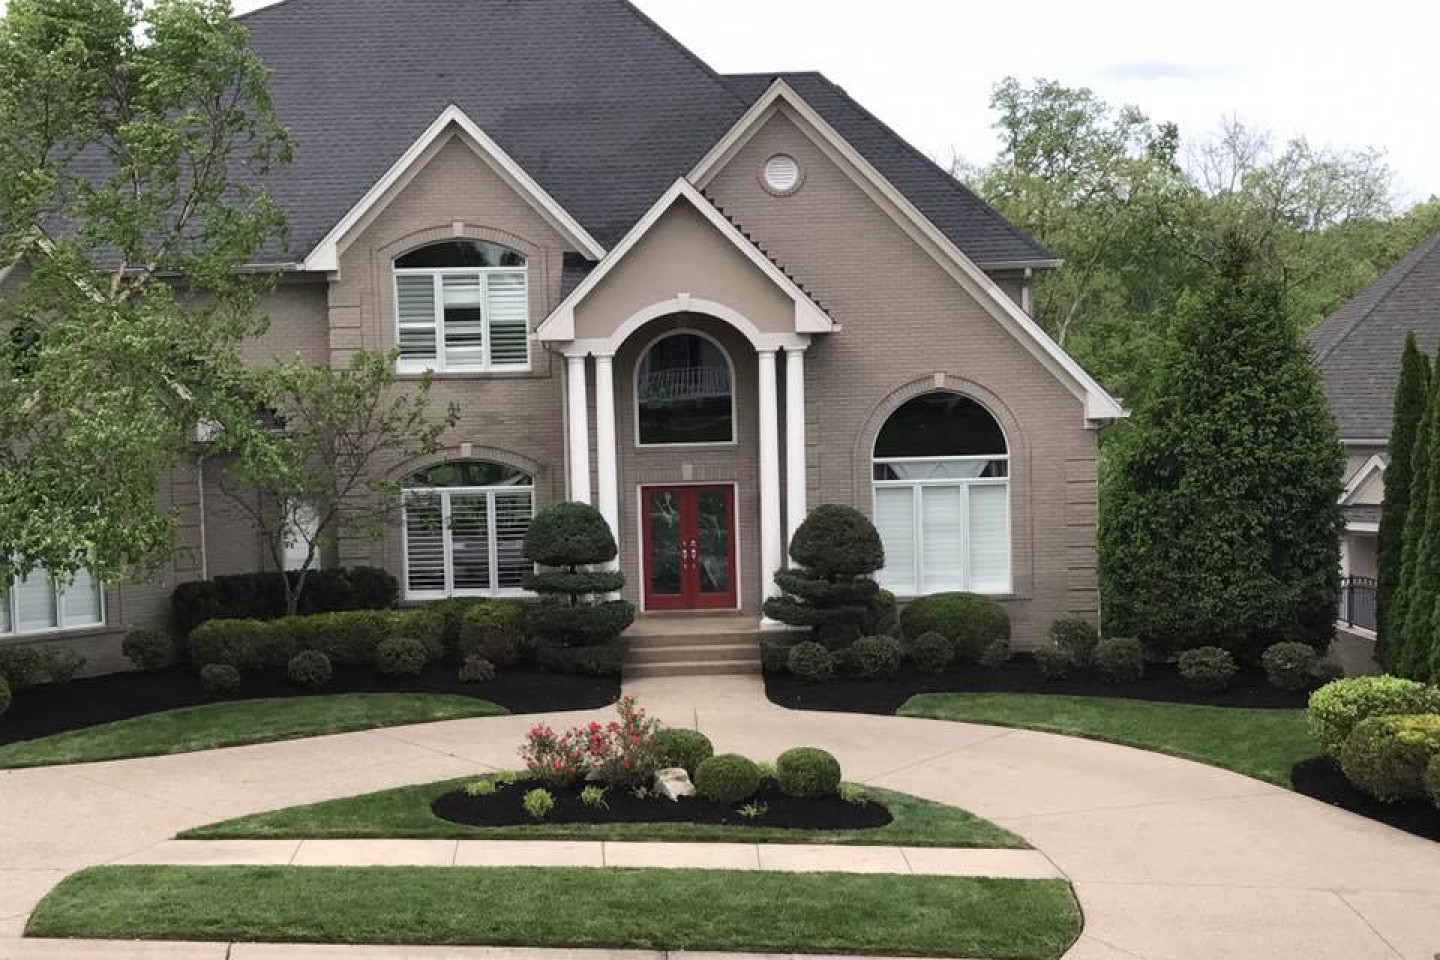 sinai-lawn-care-request-a-quote-22-photos-louisville-kentucky